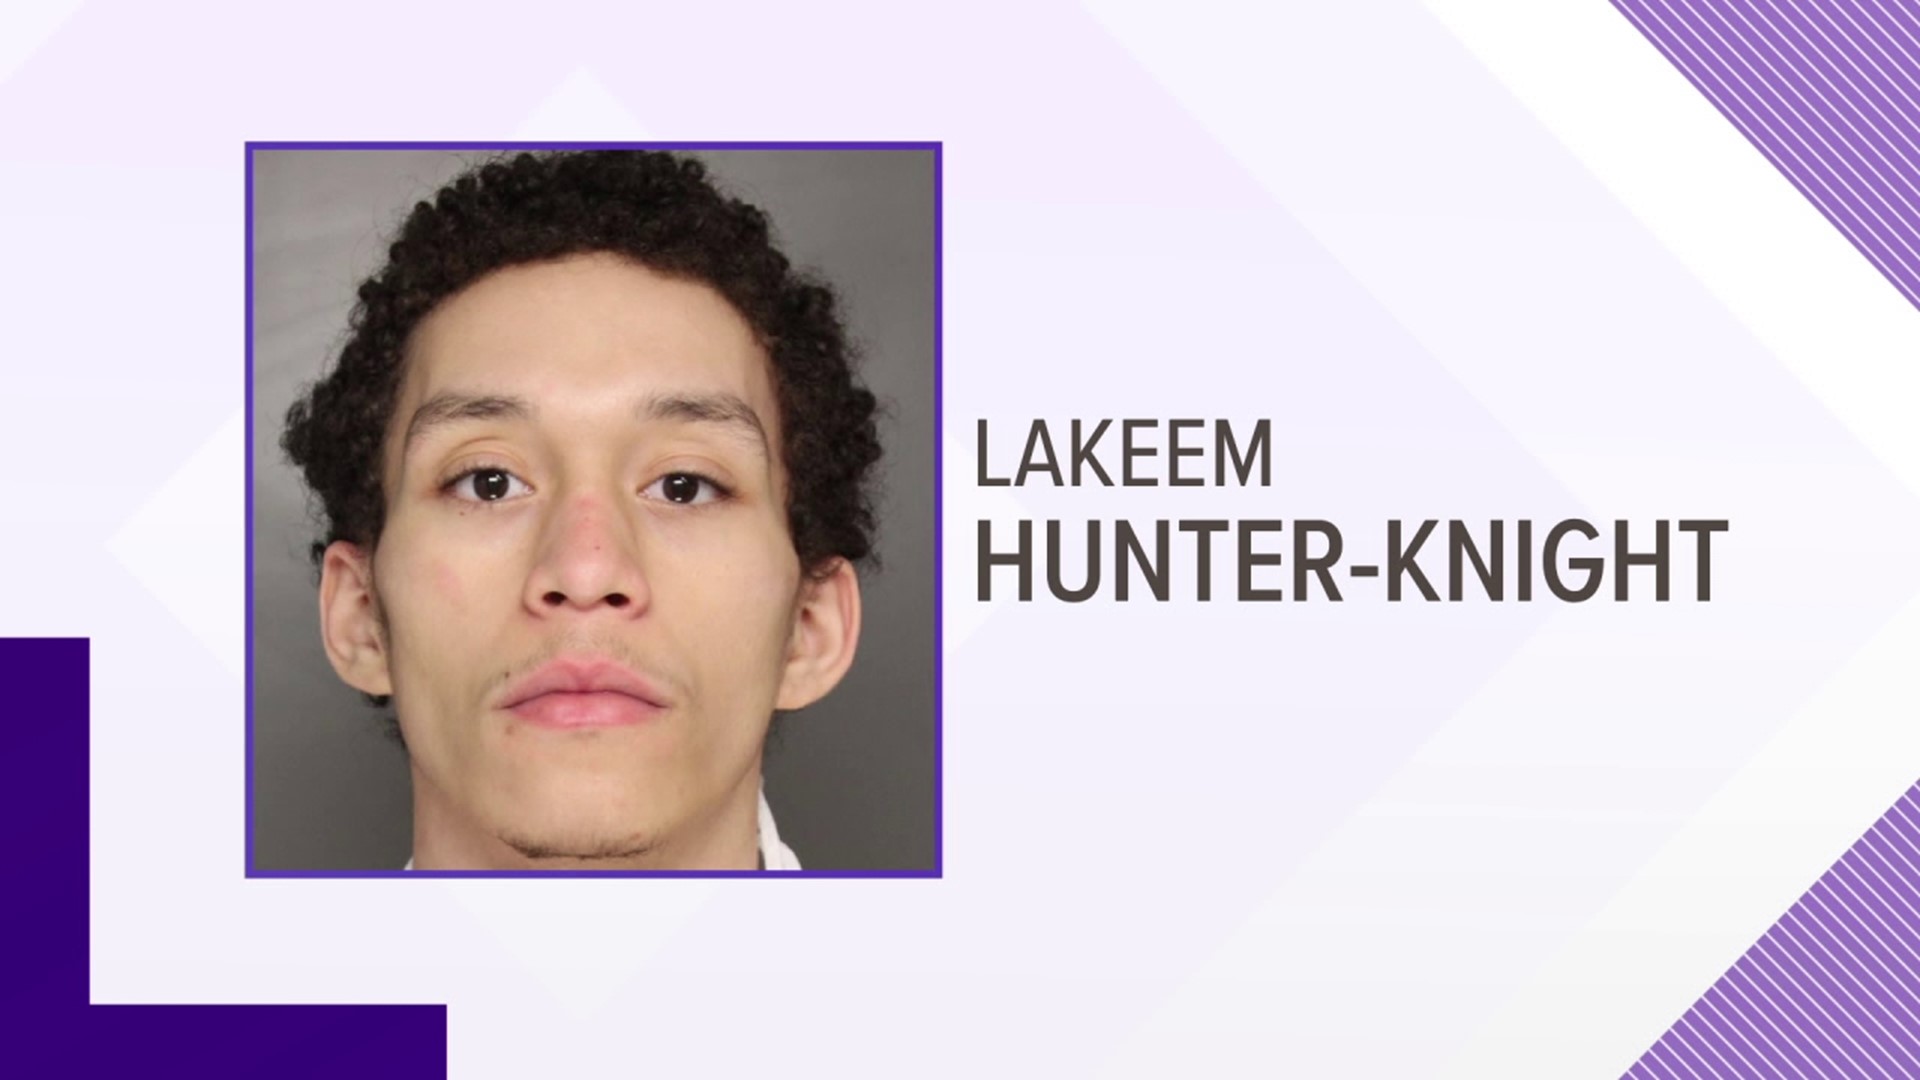 Lakeem Hunter-Knight of Tobyhanna was sentenced to seven years in prison for a burglary in Pike County in May of 2020.